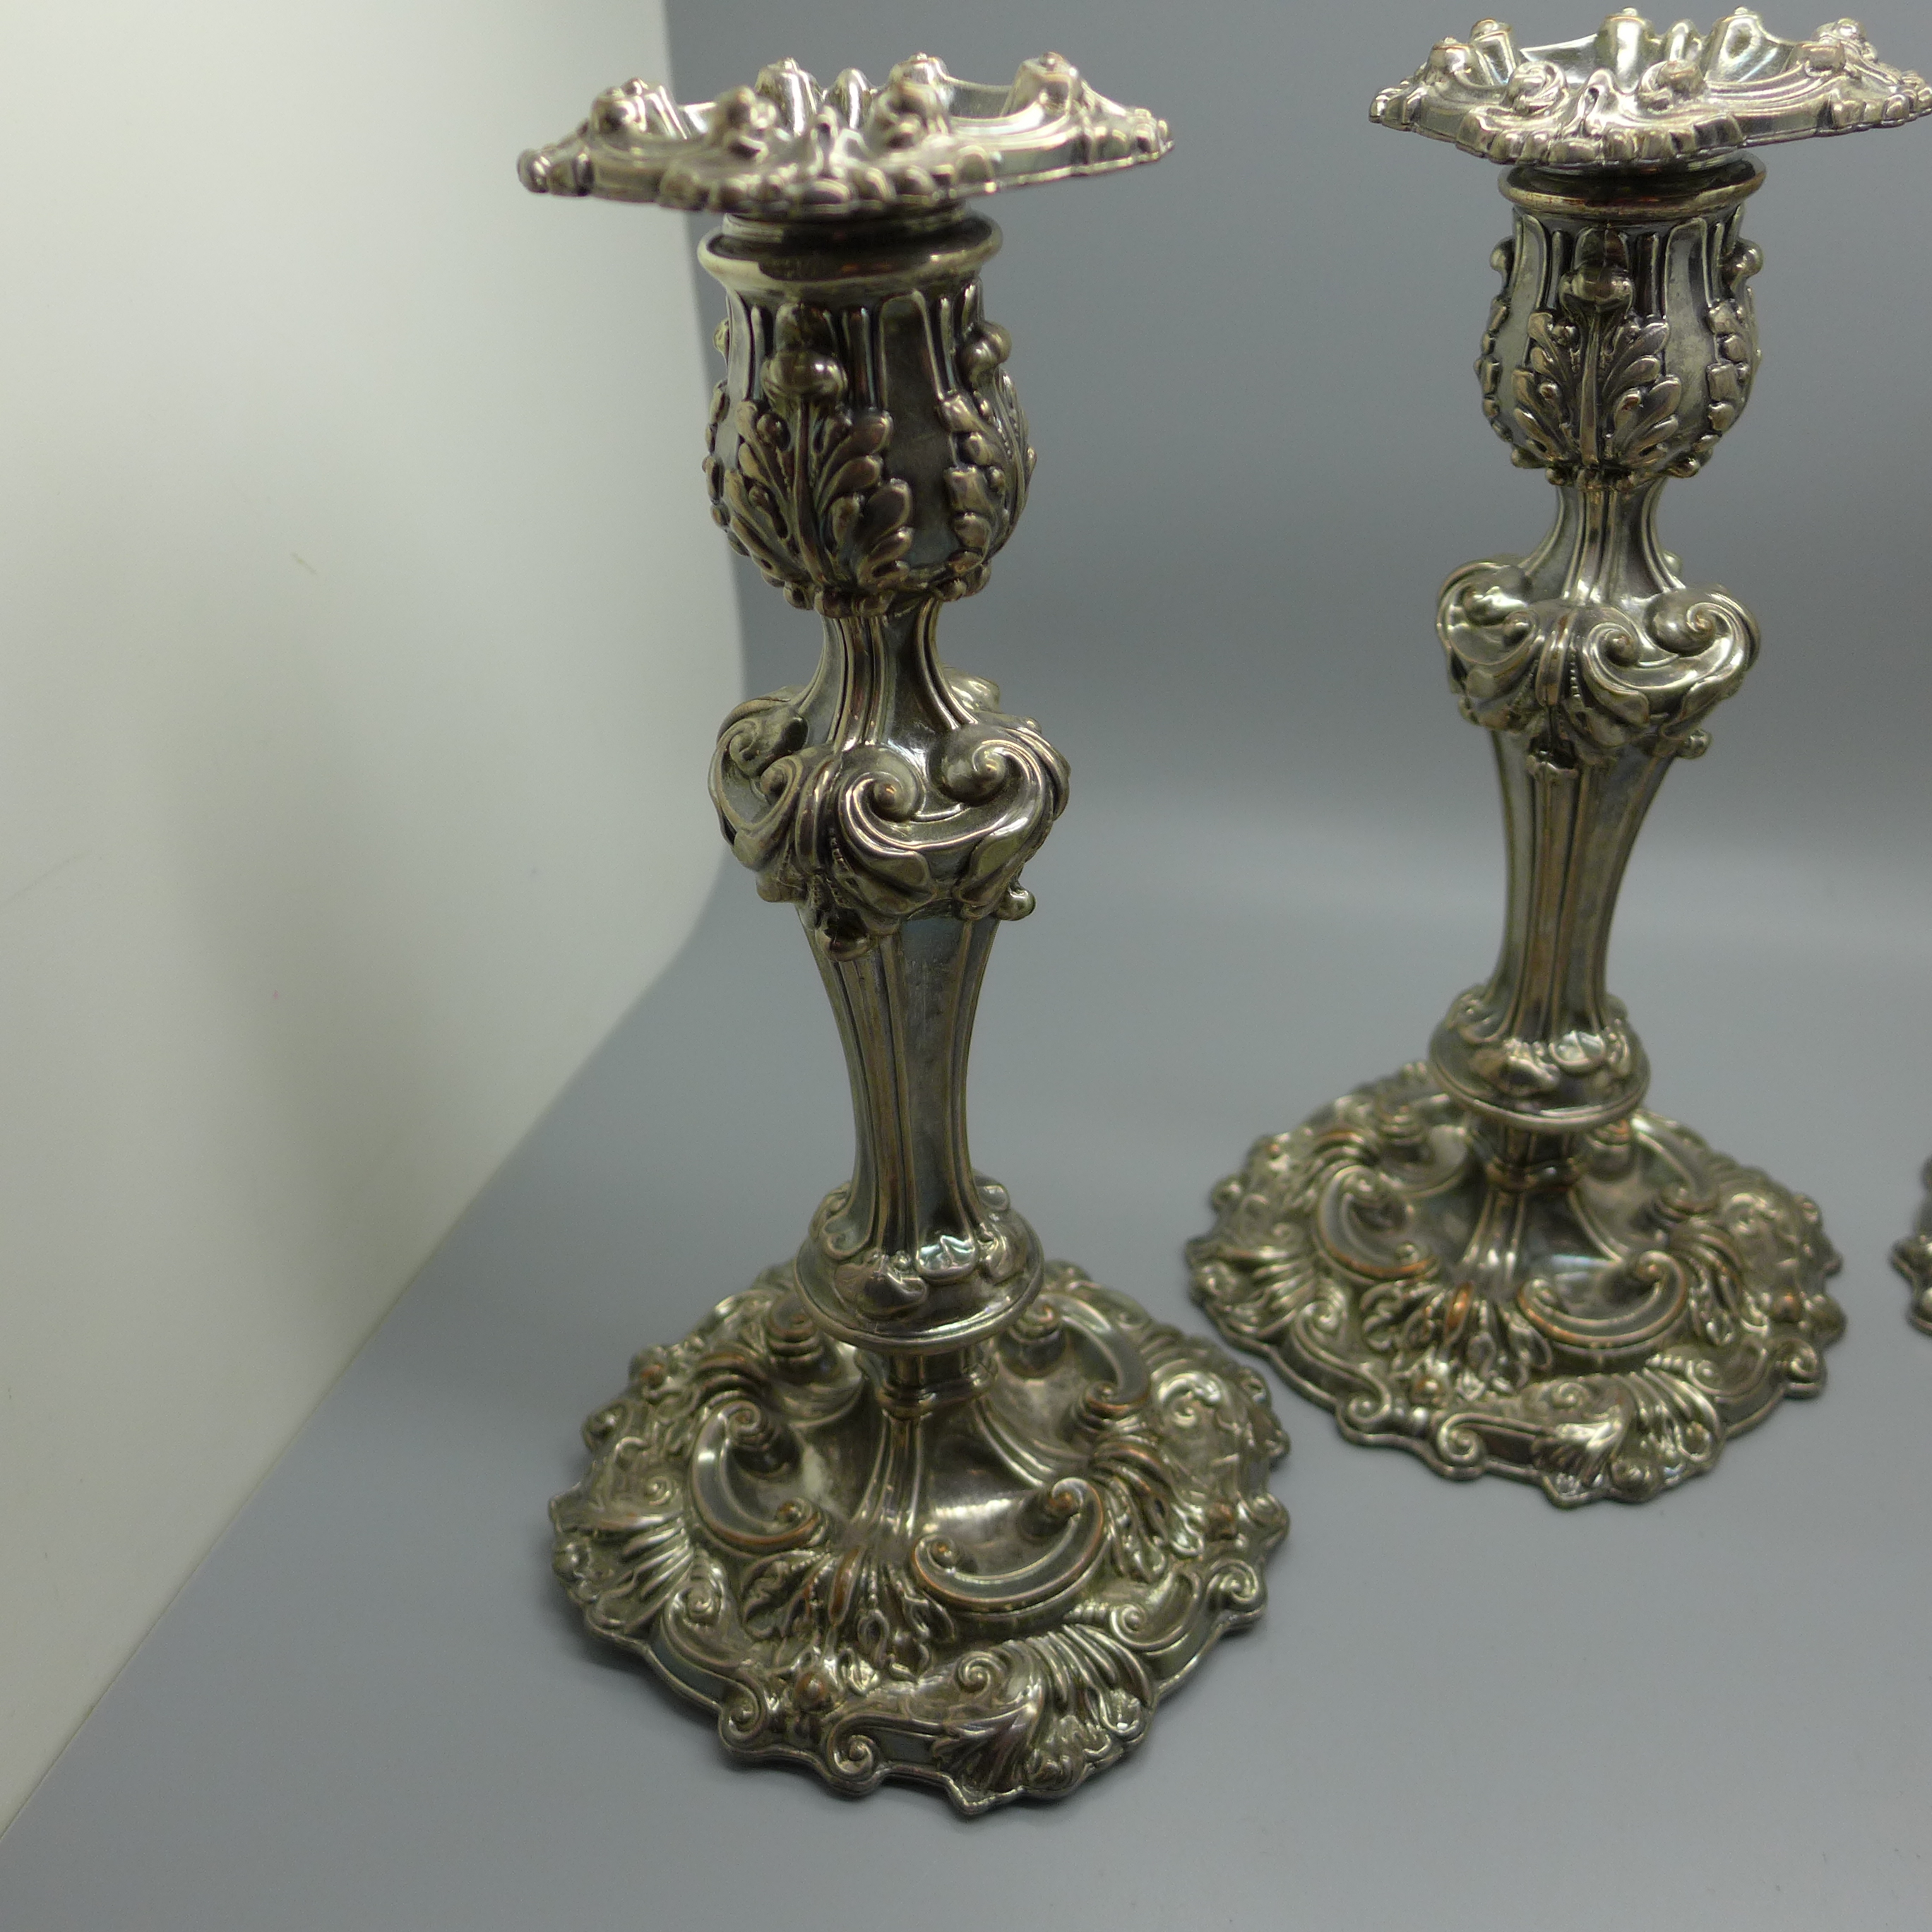 Four matching old Sheffield plate candlesticks with original sconces, circa 1830, 21cm - Image 2 of 4